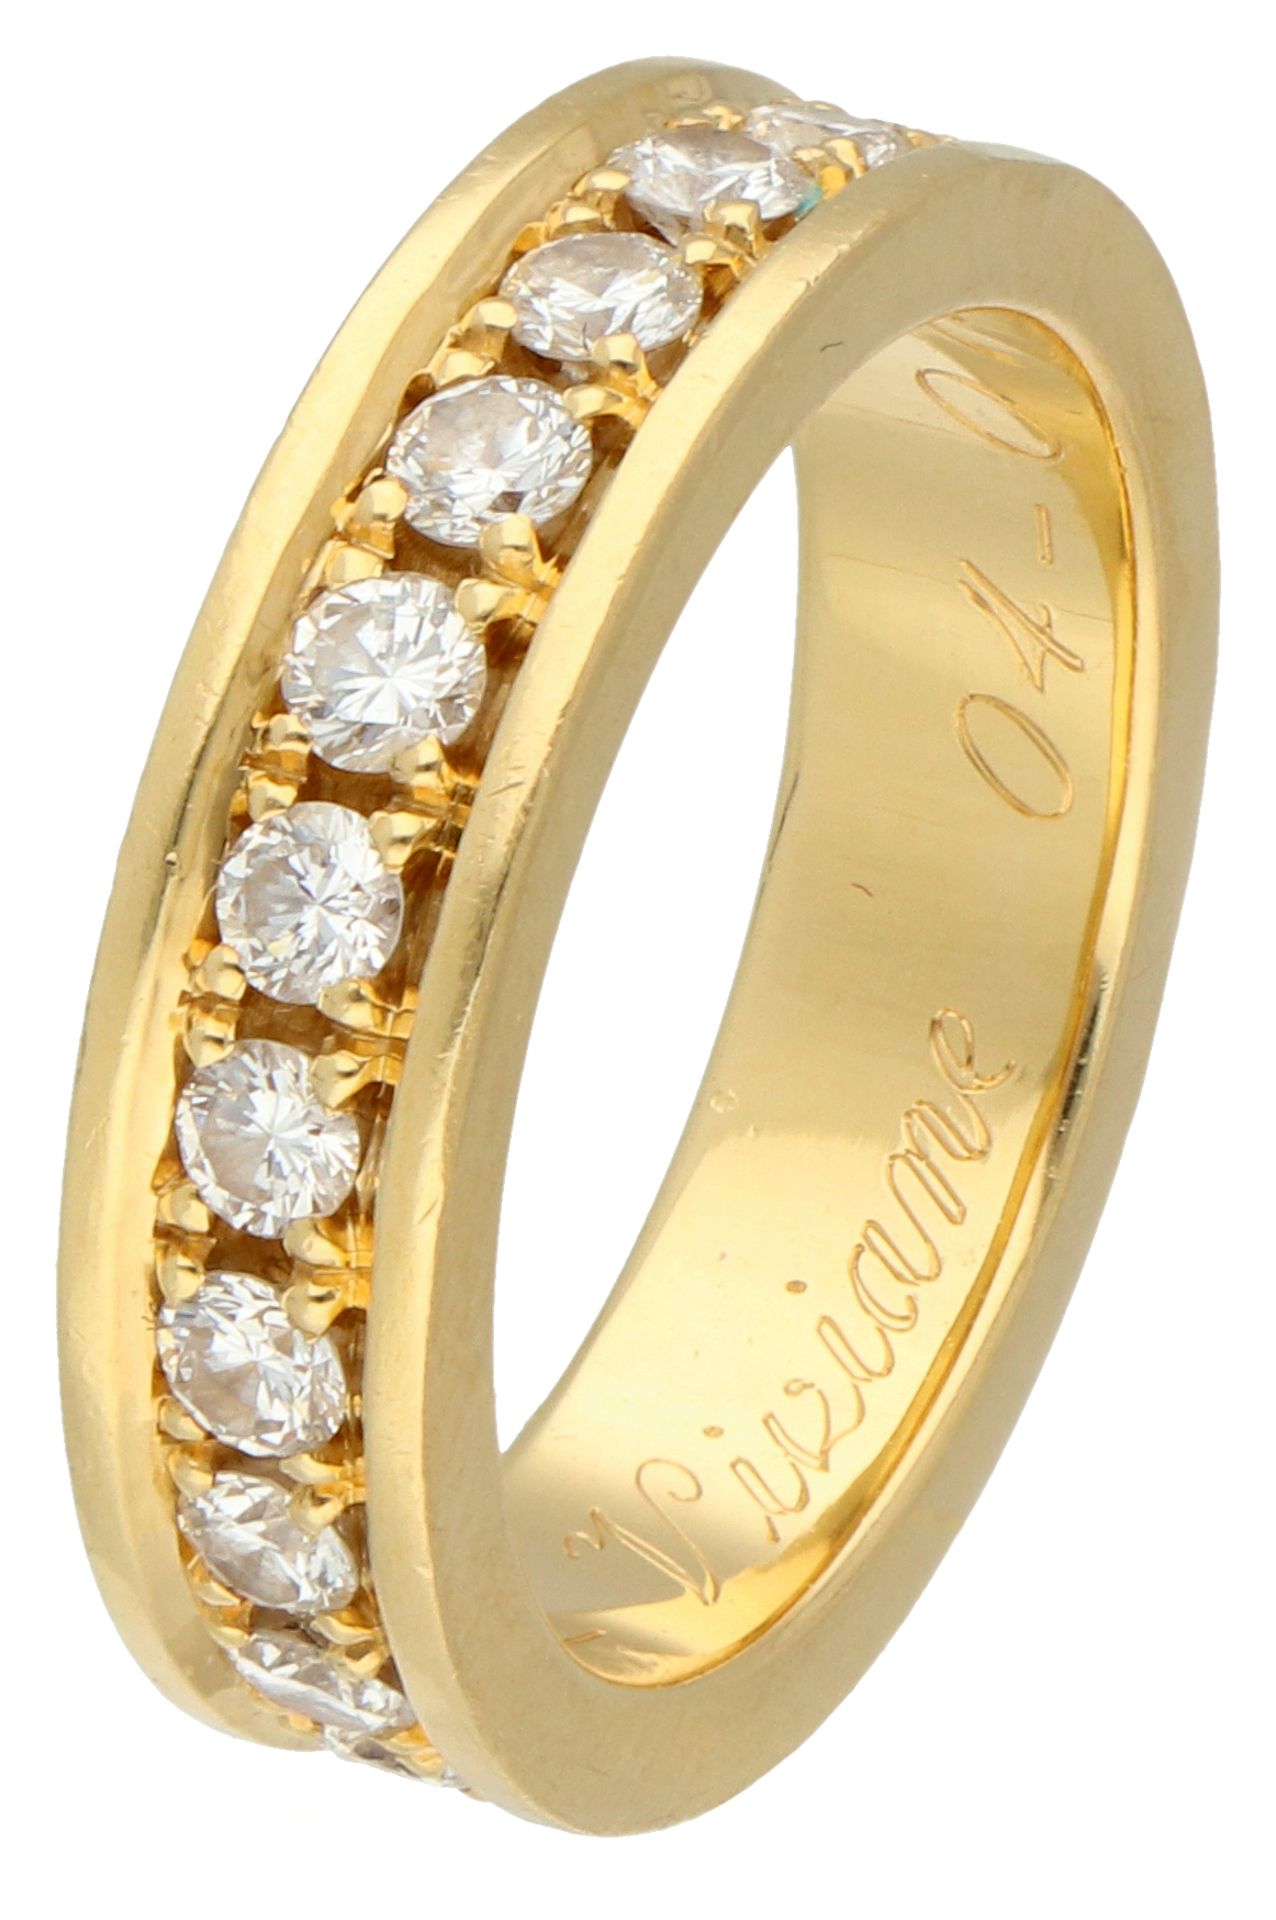 No reserve - 18K Yellow gold alliance ring set with approx. 1.05 ct. diamond.